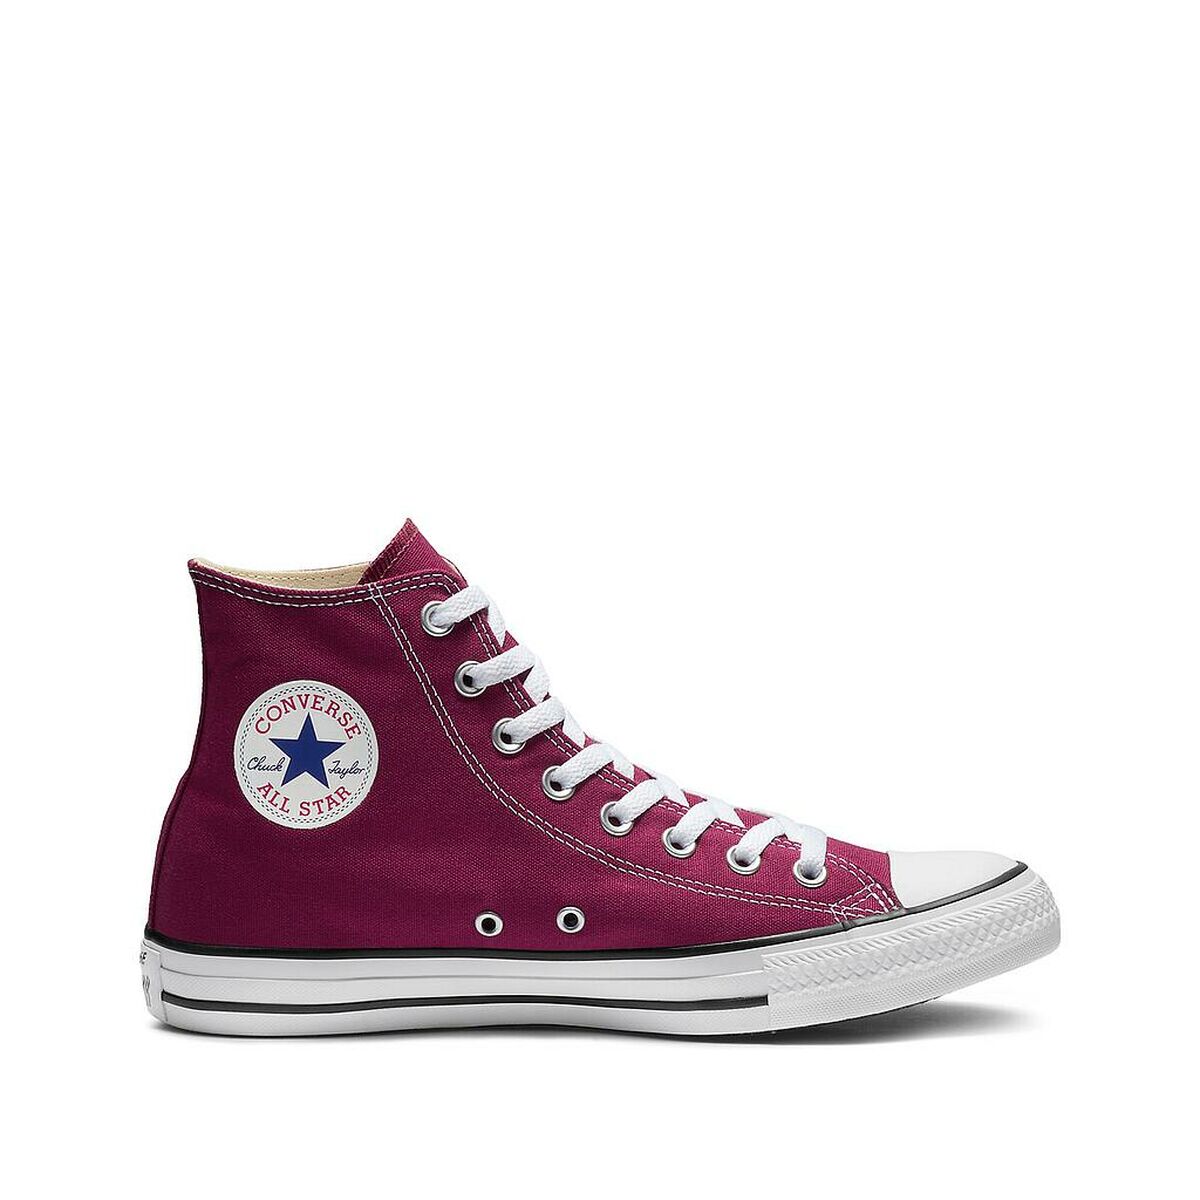 Chaussures casual homme Converse CHUCK TAYLOR ALL STAR M9613C  Bordeaux